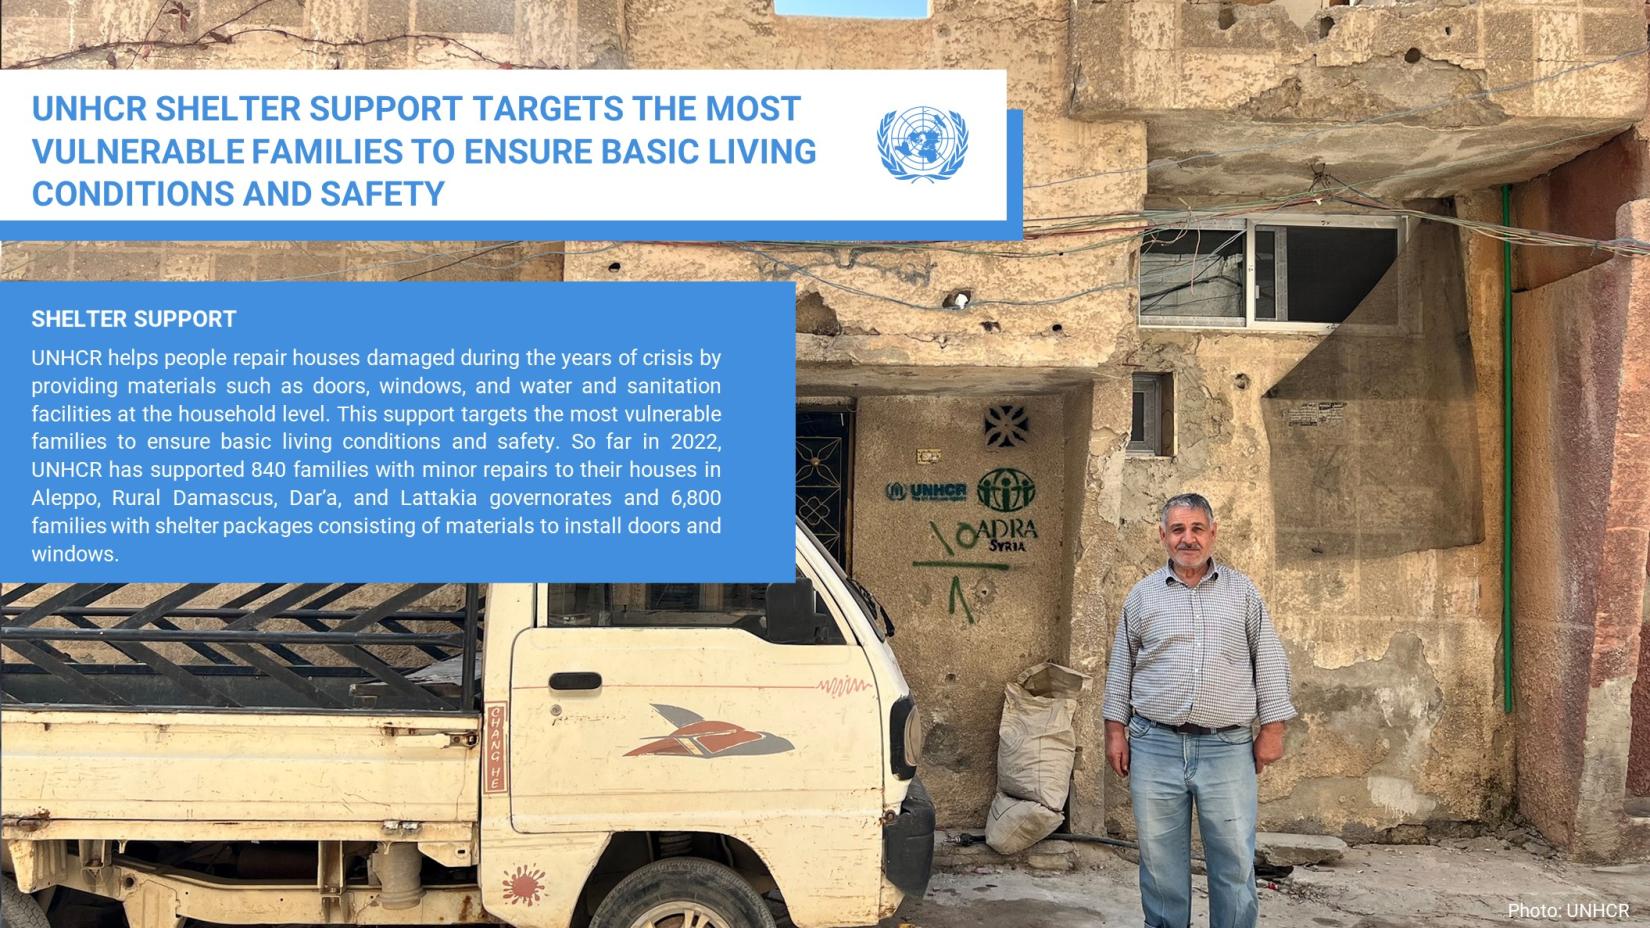 UNHCR SHELTER SUPPORT TARGETS THE MOST VULNERABLE FAMILIES TO ENSURE BASIC LIVING CONDITIONS AND SAFETY